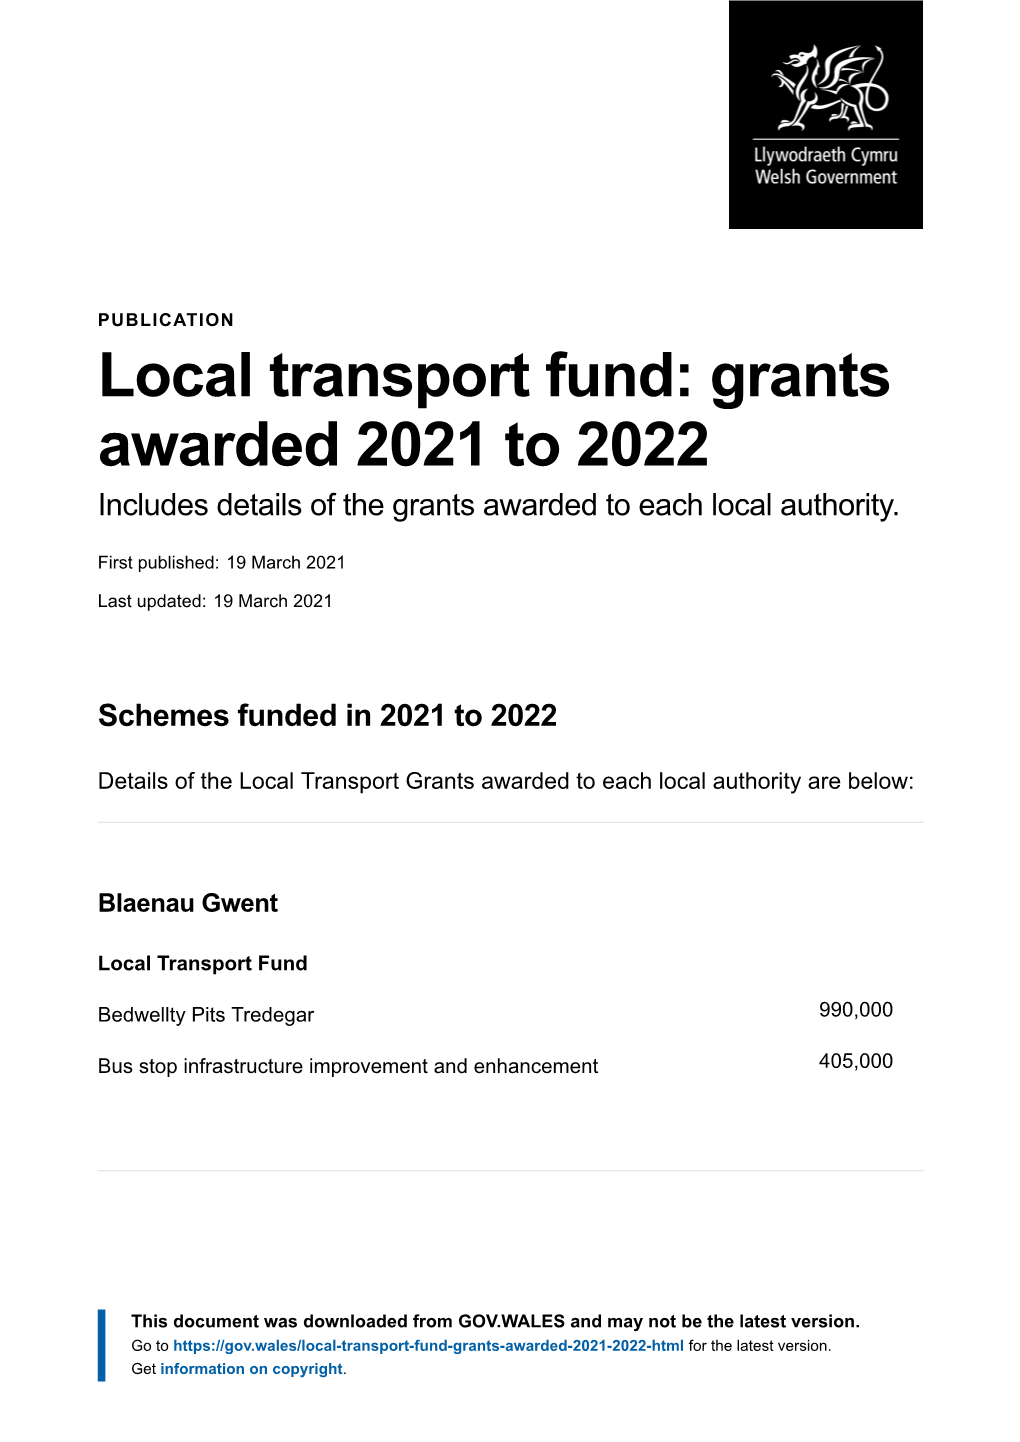 Local Transport Fund: Grants Awarded 2021 to 2022 | GOV.WALES